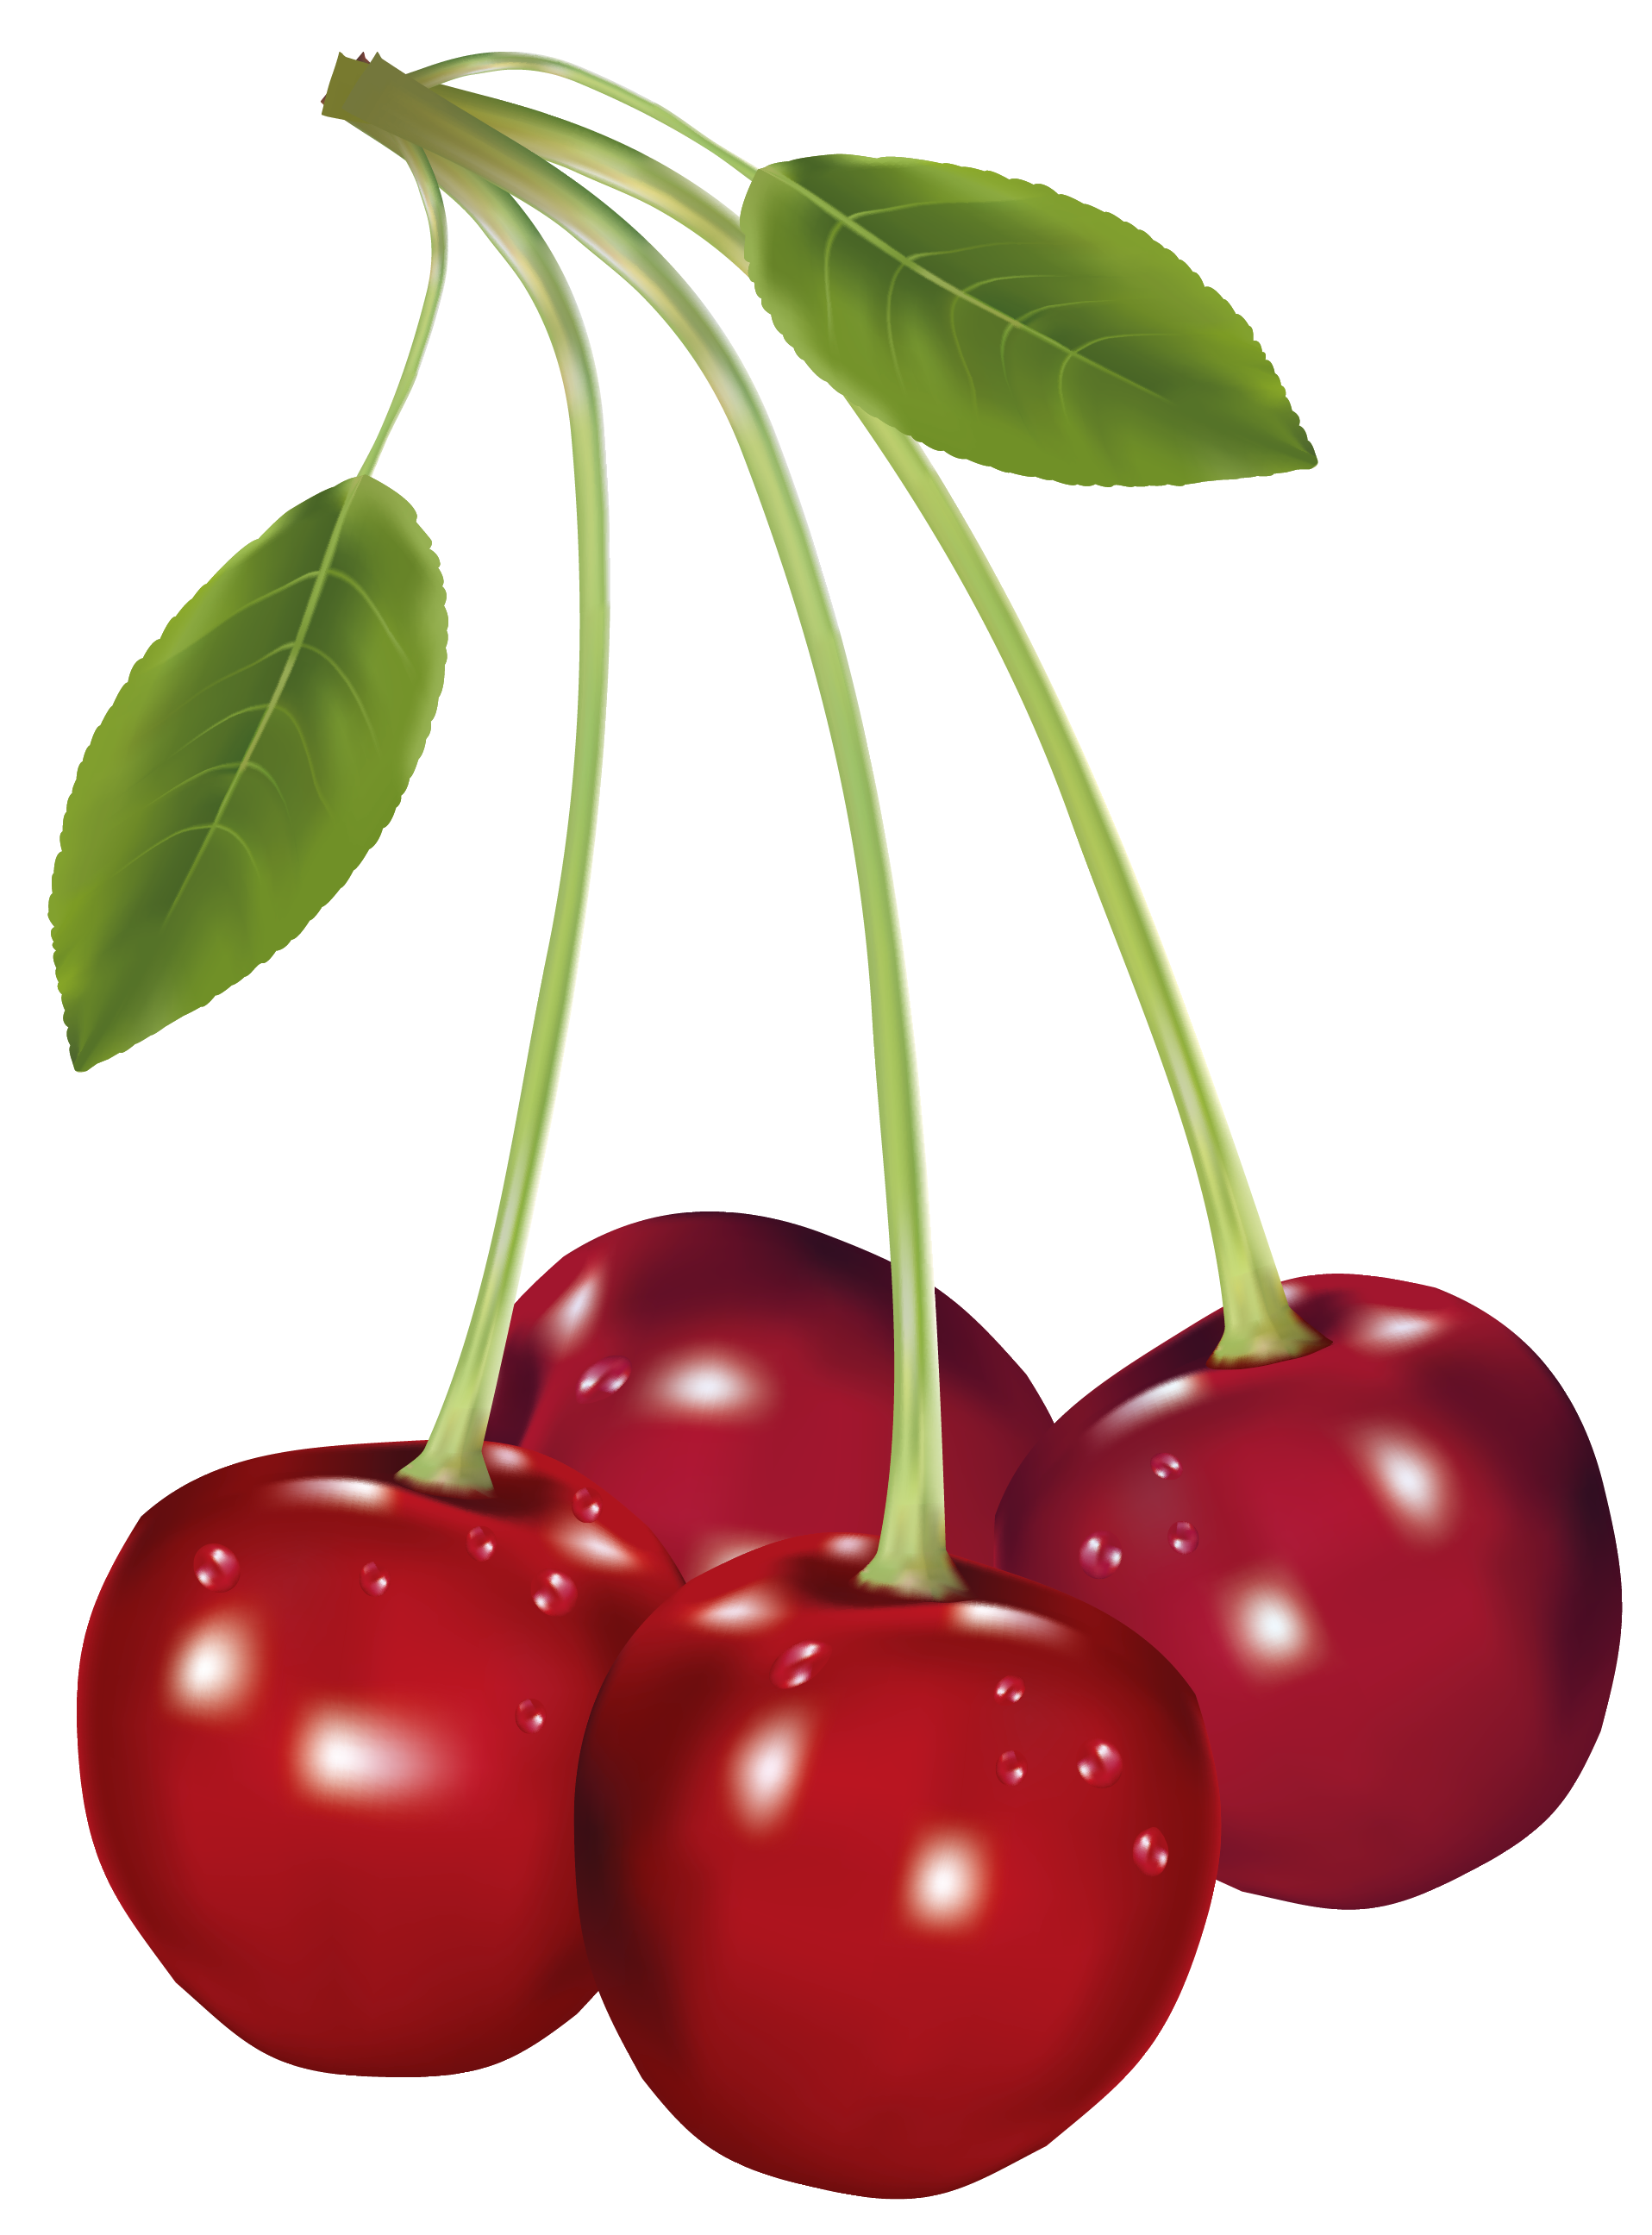 Tomatoes clipart watercolor. Cherries png picture gallery